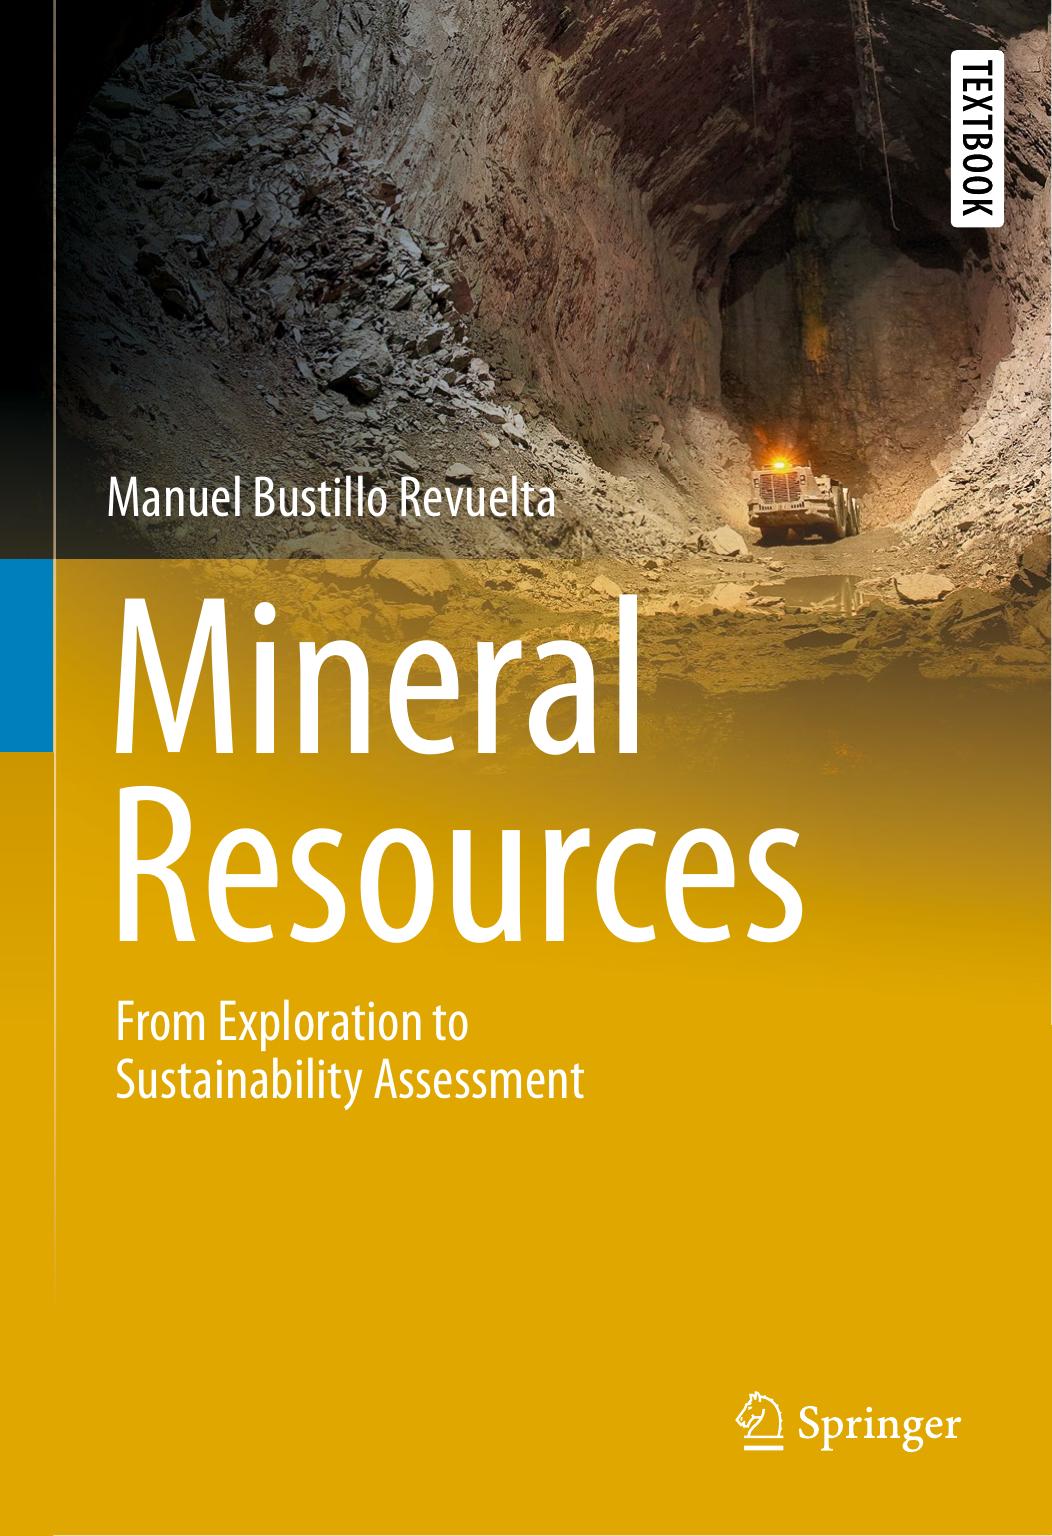 Mineral resources from exploration to sustainability assessment 2018